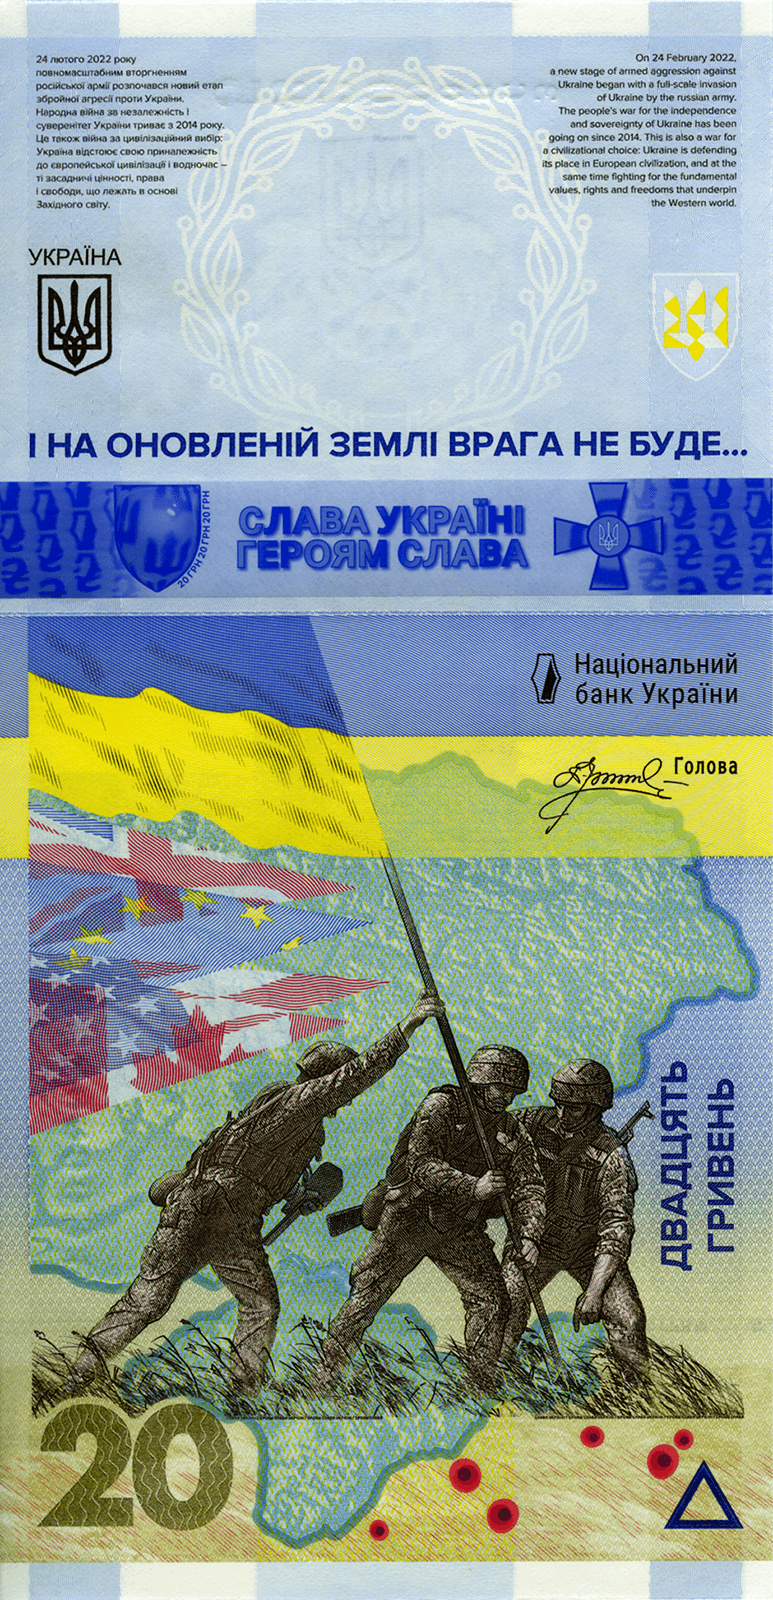 WE WILL NOT FORGET! WE WILL NOT FORGIVE! (commemorative banknote in an envelope) (obverse)